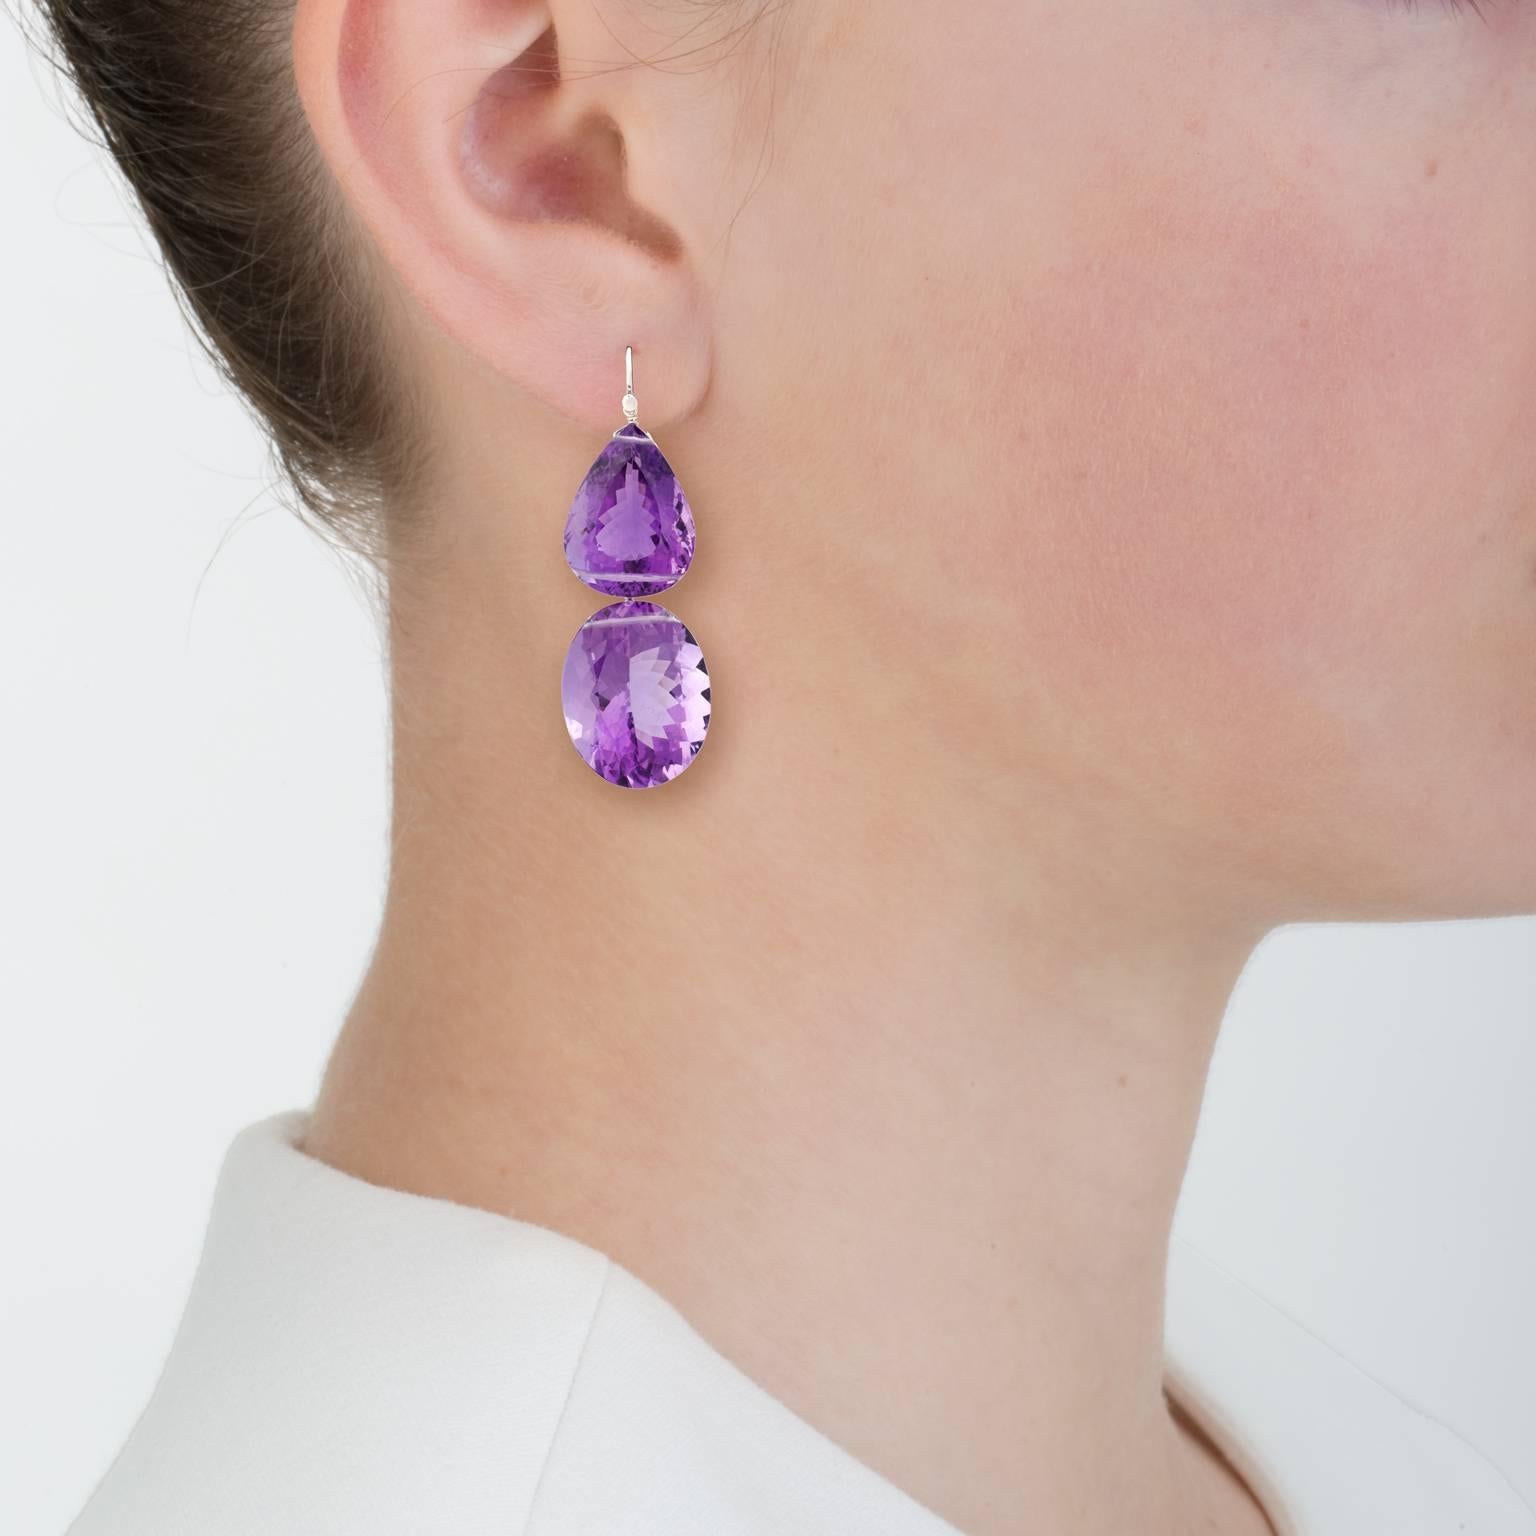 Large amethysts make a bold statement.  These double amethyst earrings of high quality have hints of red fire. The large stones make a bold earring that is appropriate for day or night.

Brazilian amethyst - 118 cts
Platinum wire
18k white gold